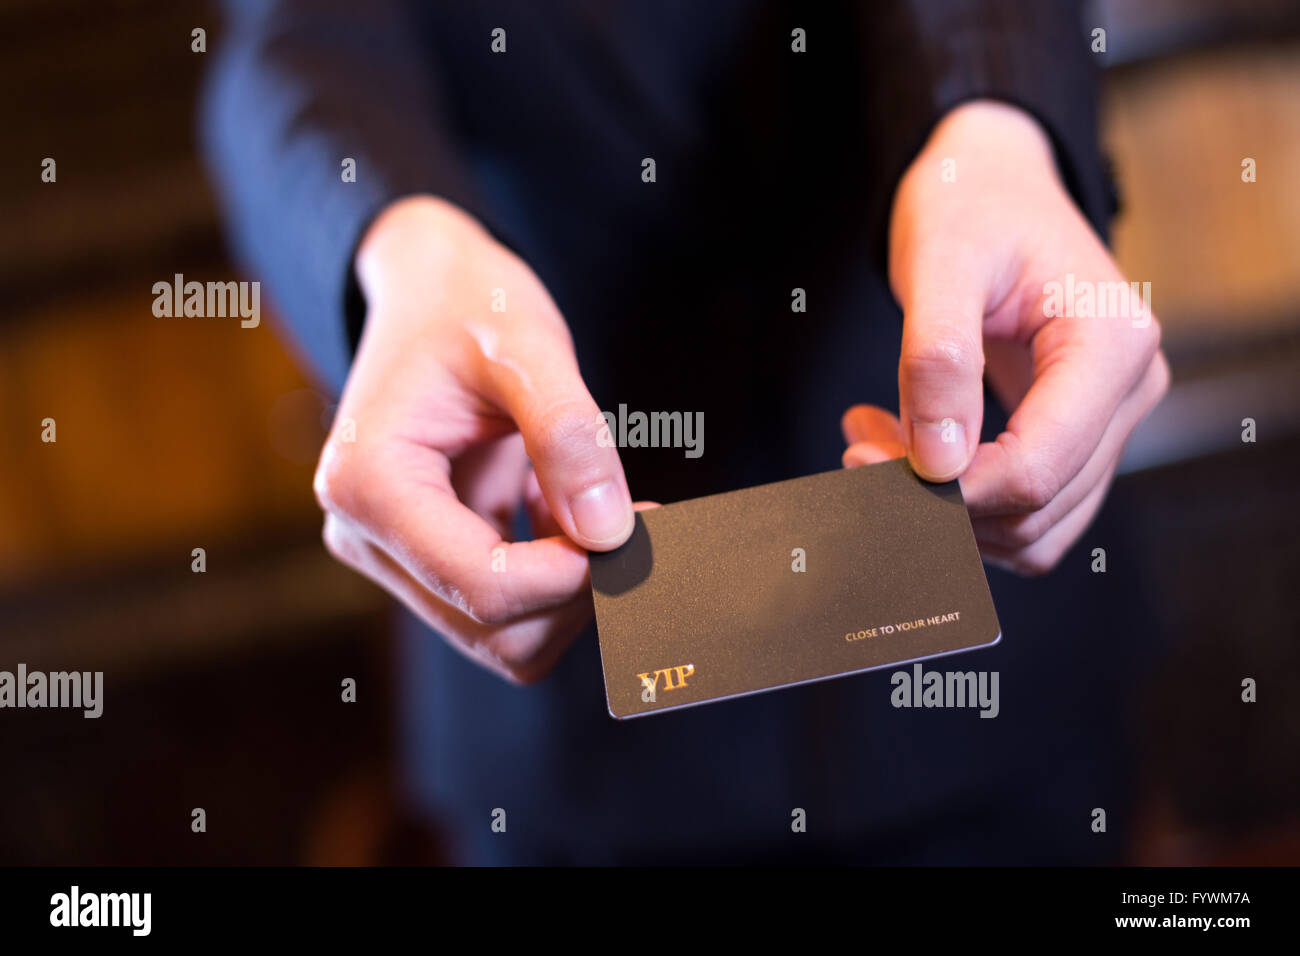 people-passing-card-in-reception-room-stock-photo-alamy